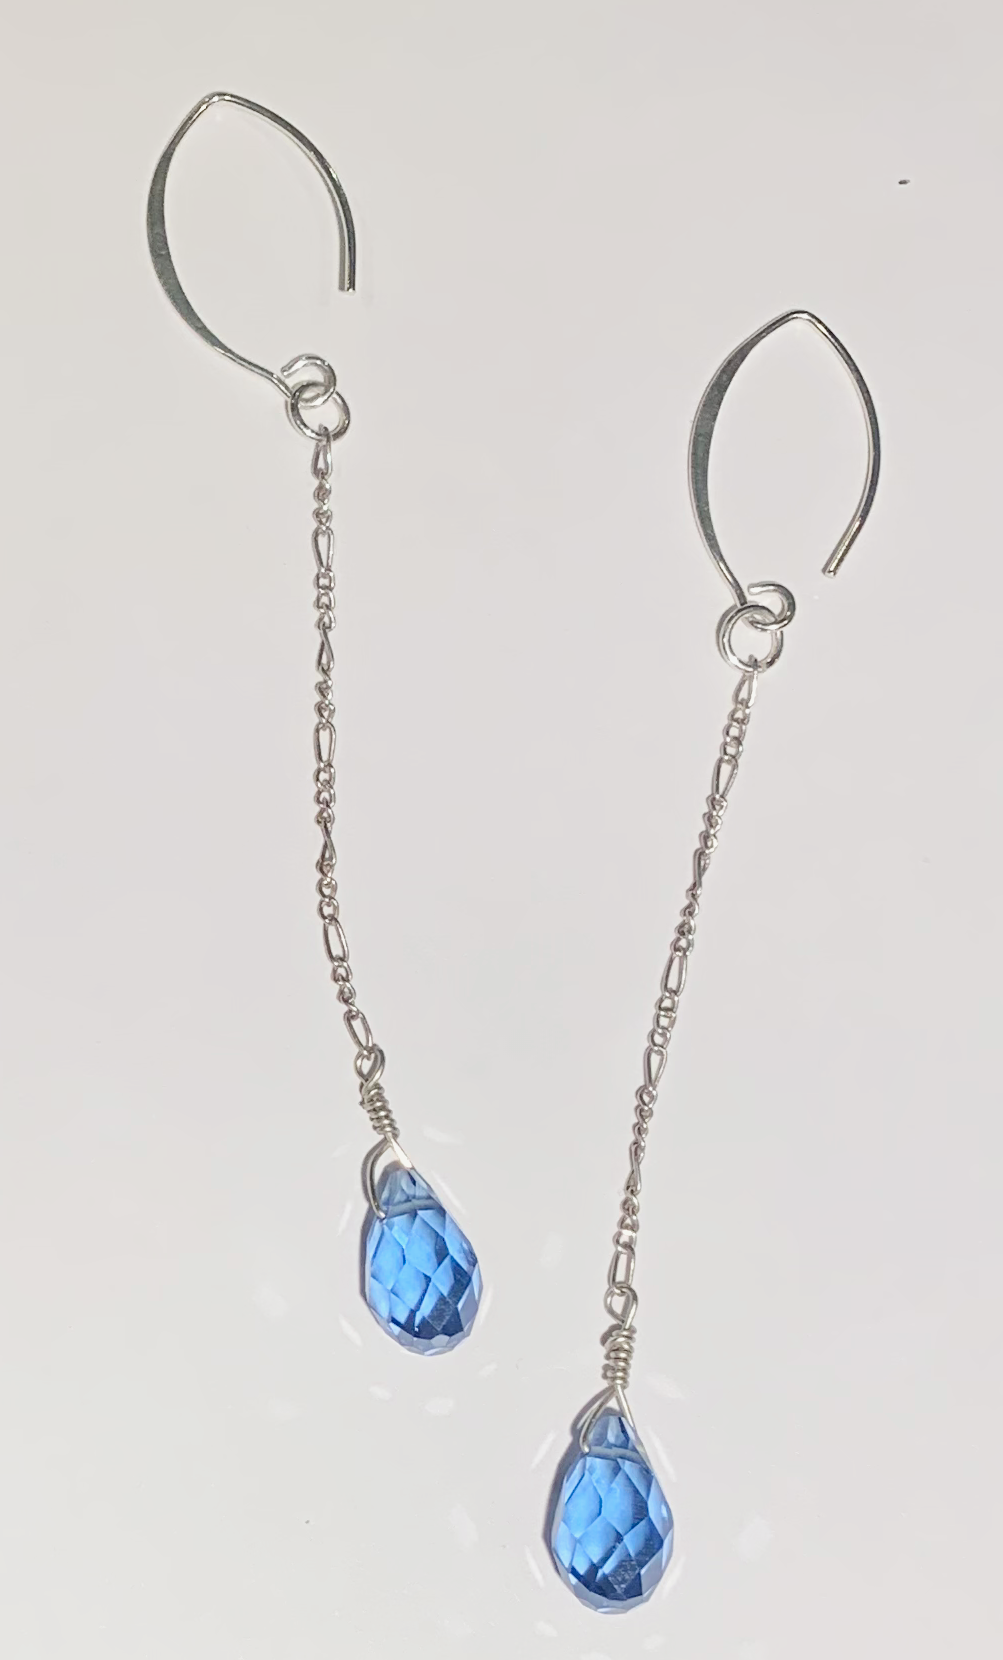 Aqua Crystal Faceted Briolette with Sterling Silver Chain Earrings